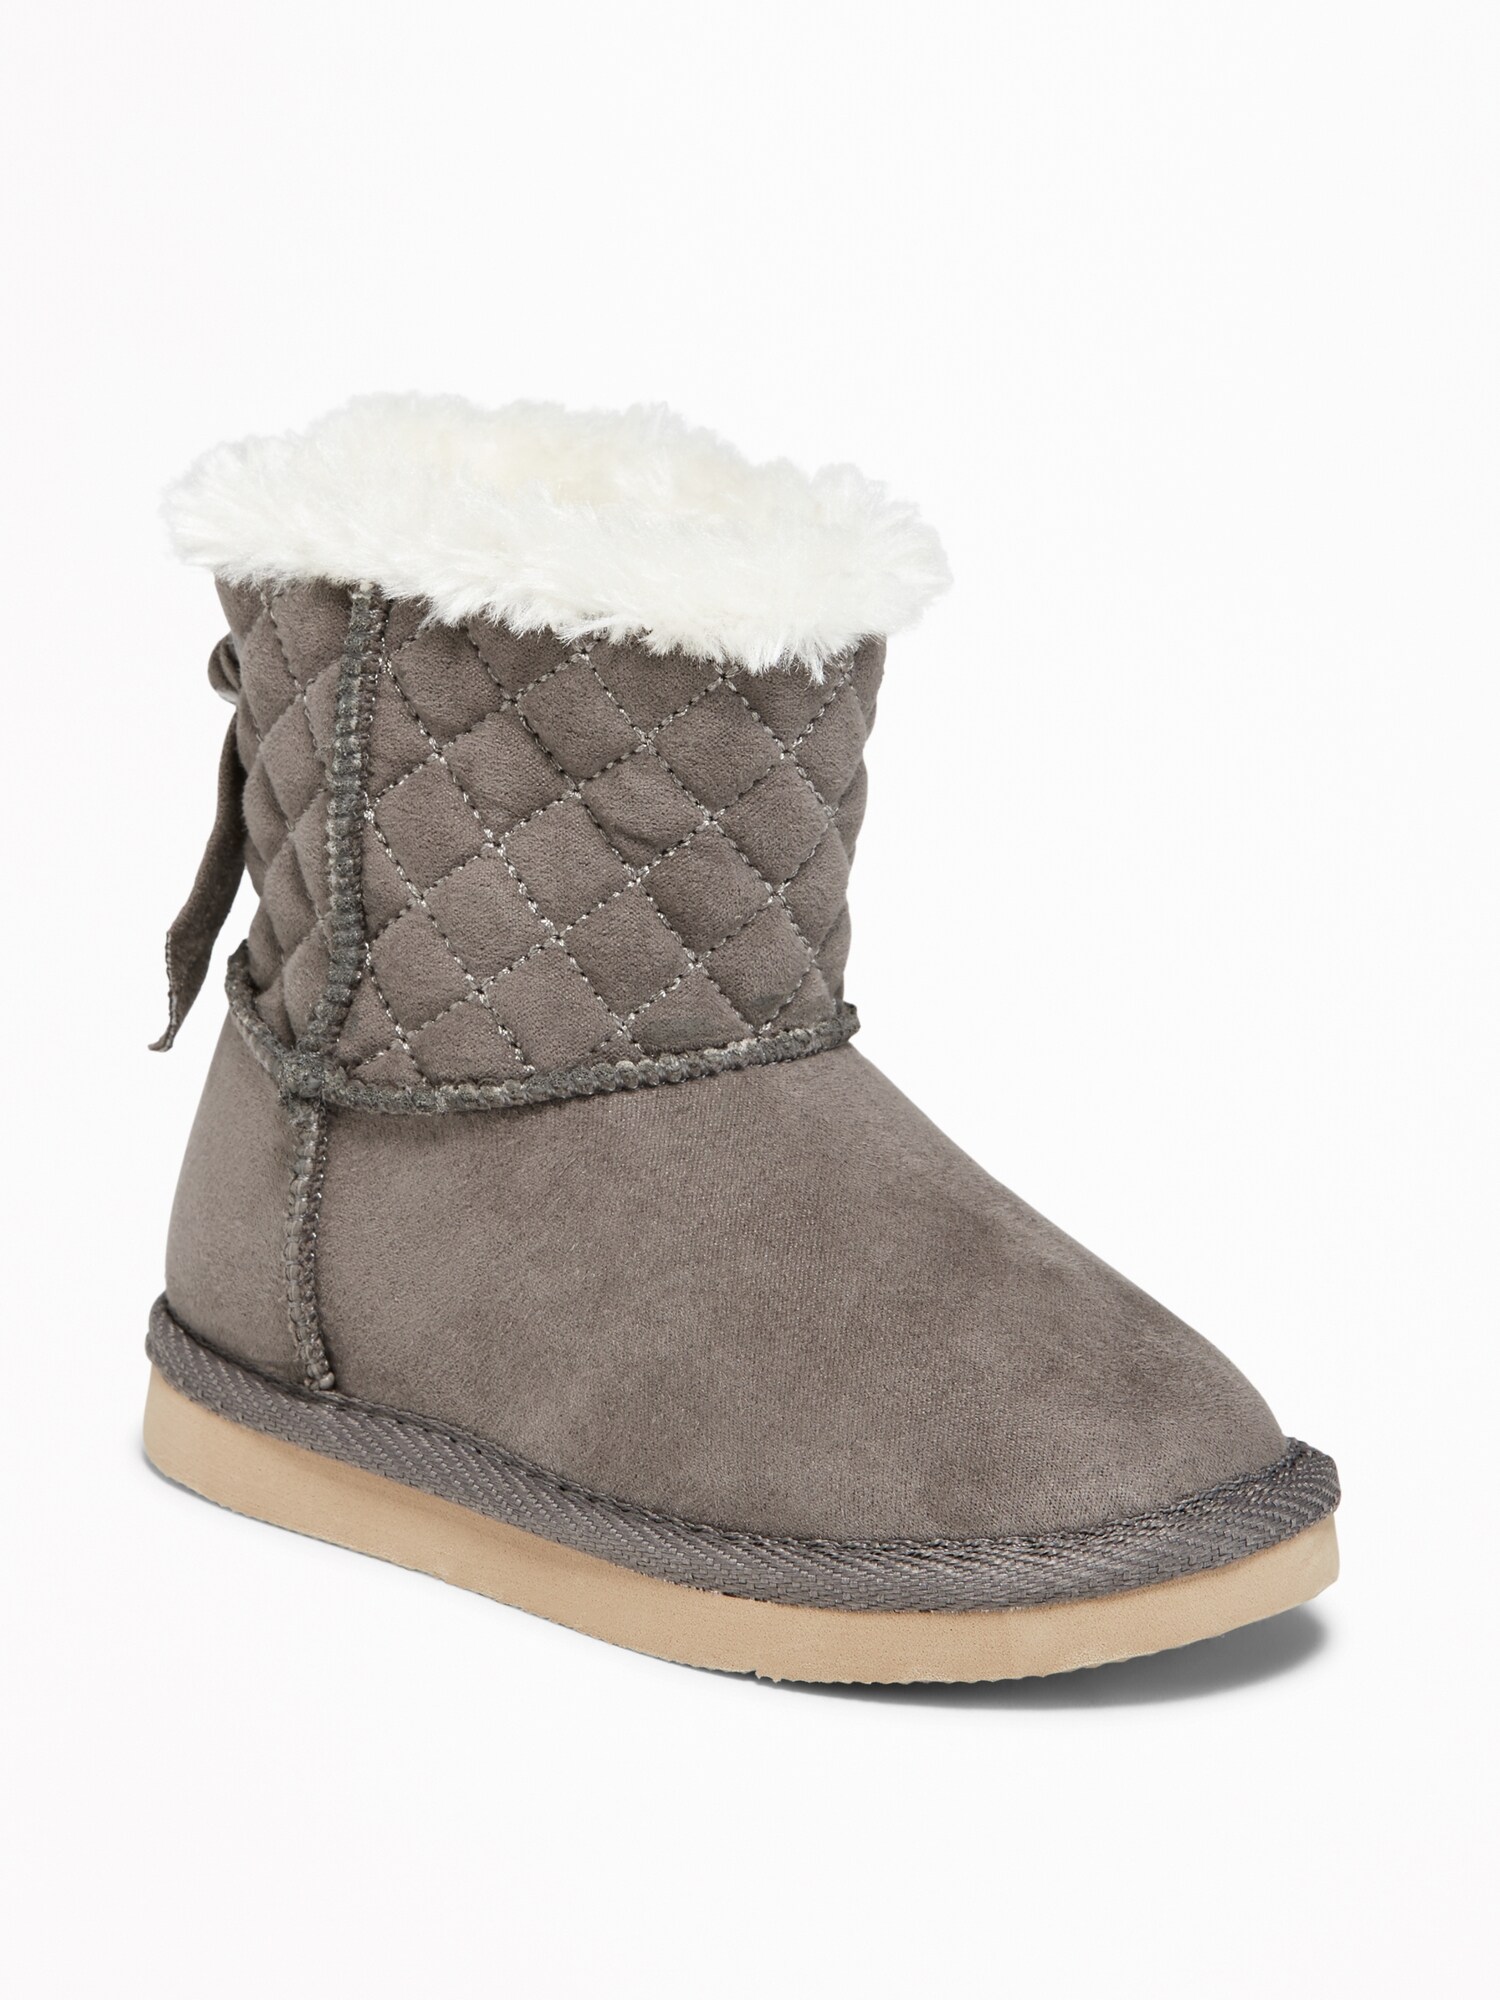 Quilted Faux-Suede Adoraboots for Toddler Girls | Old Navy